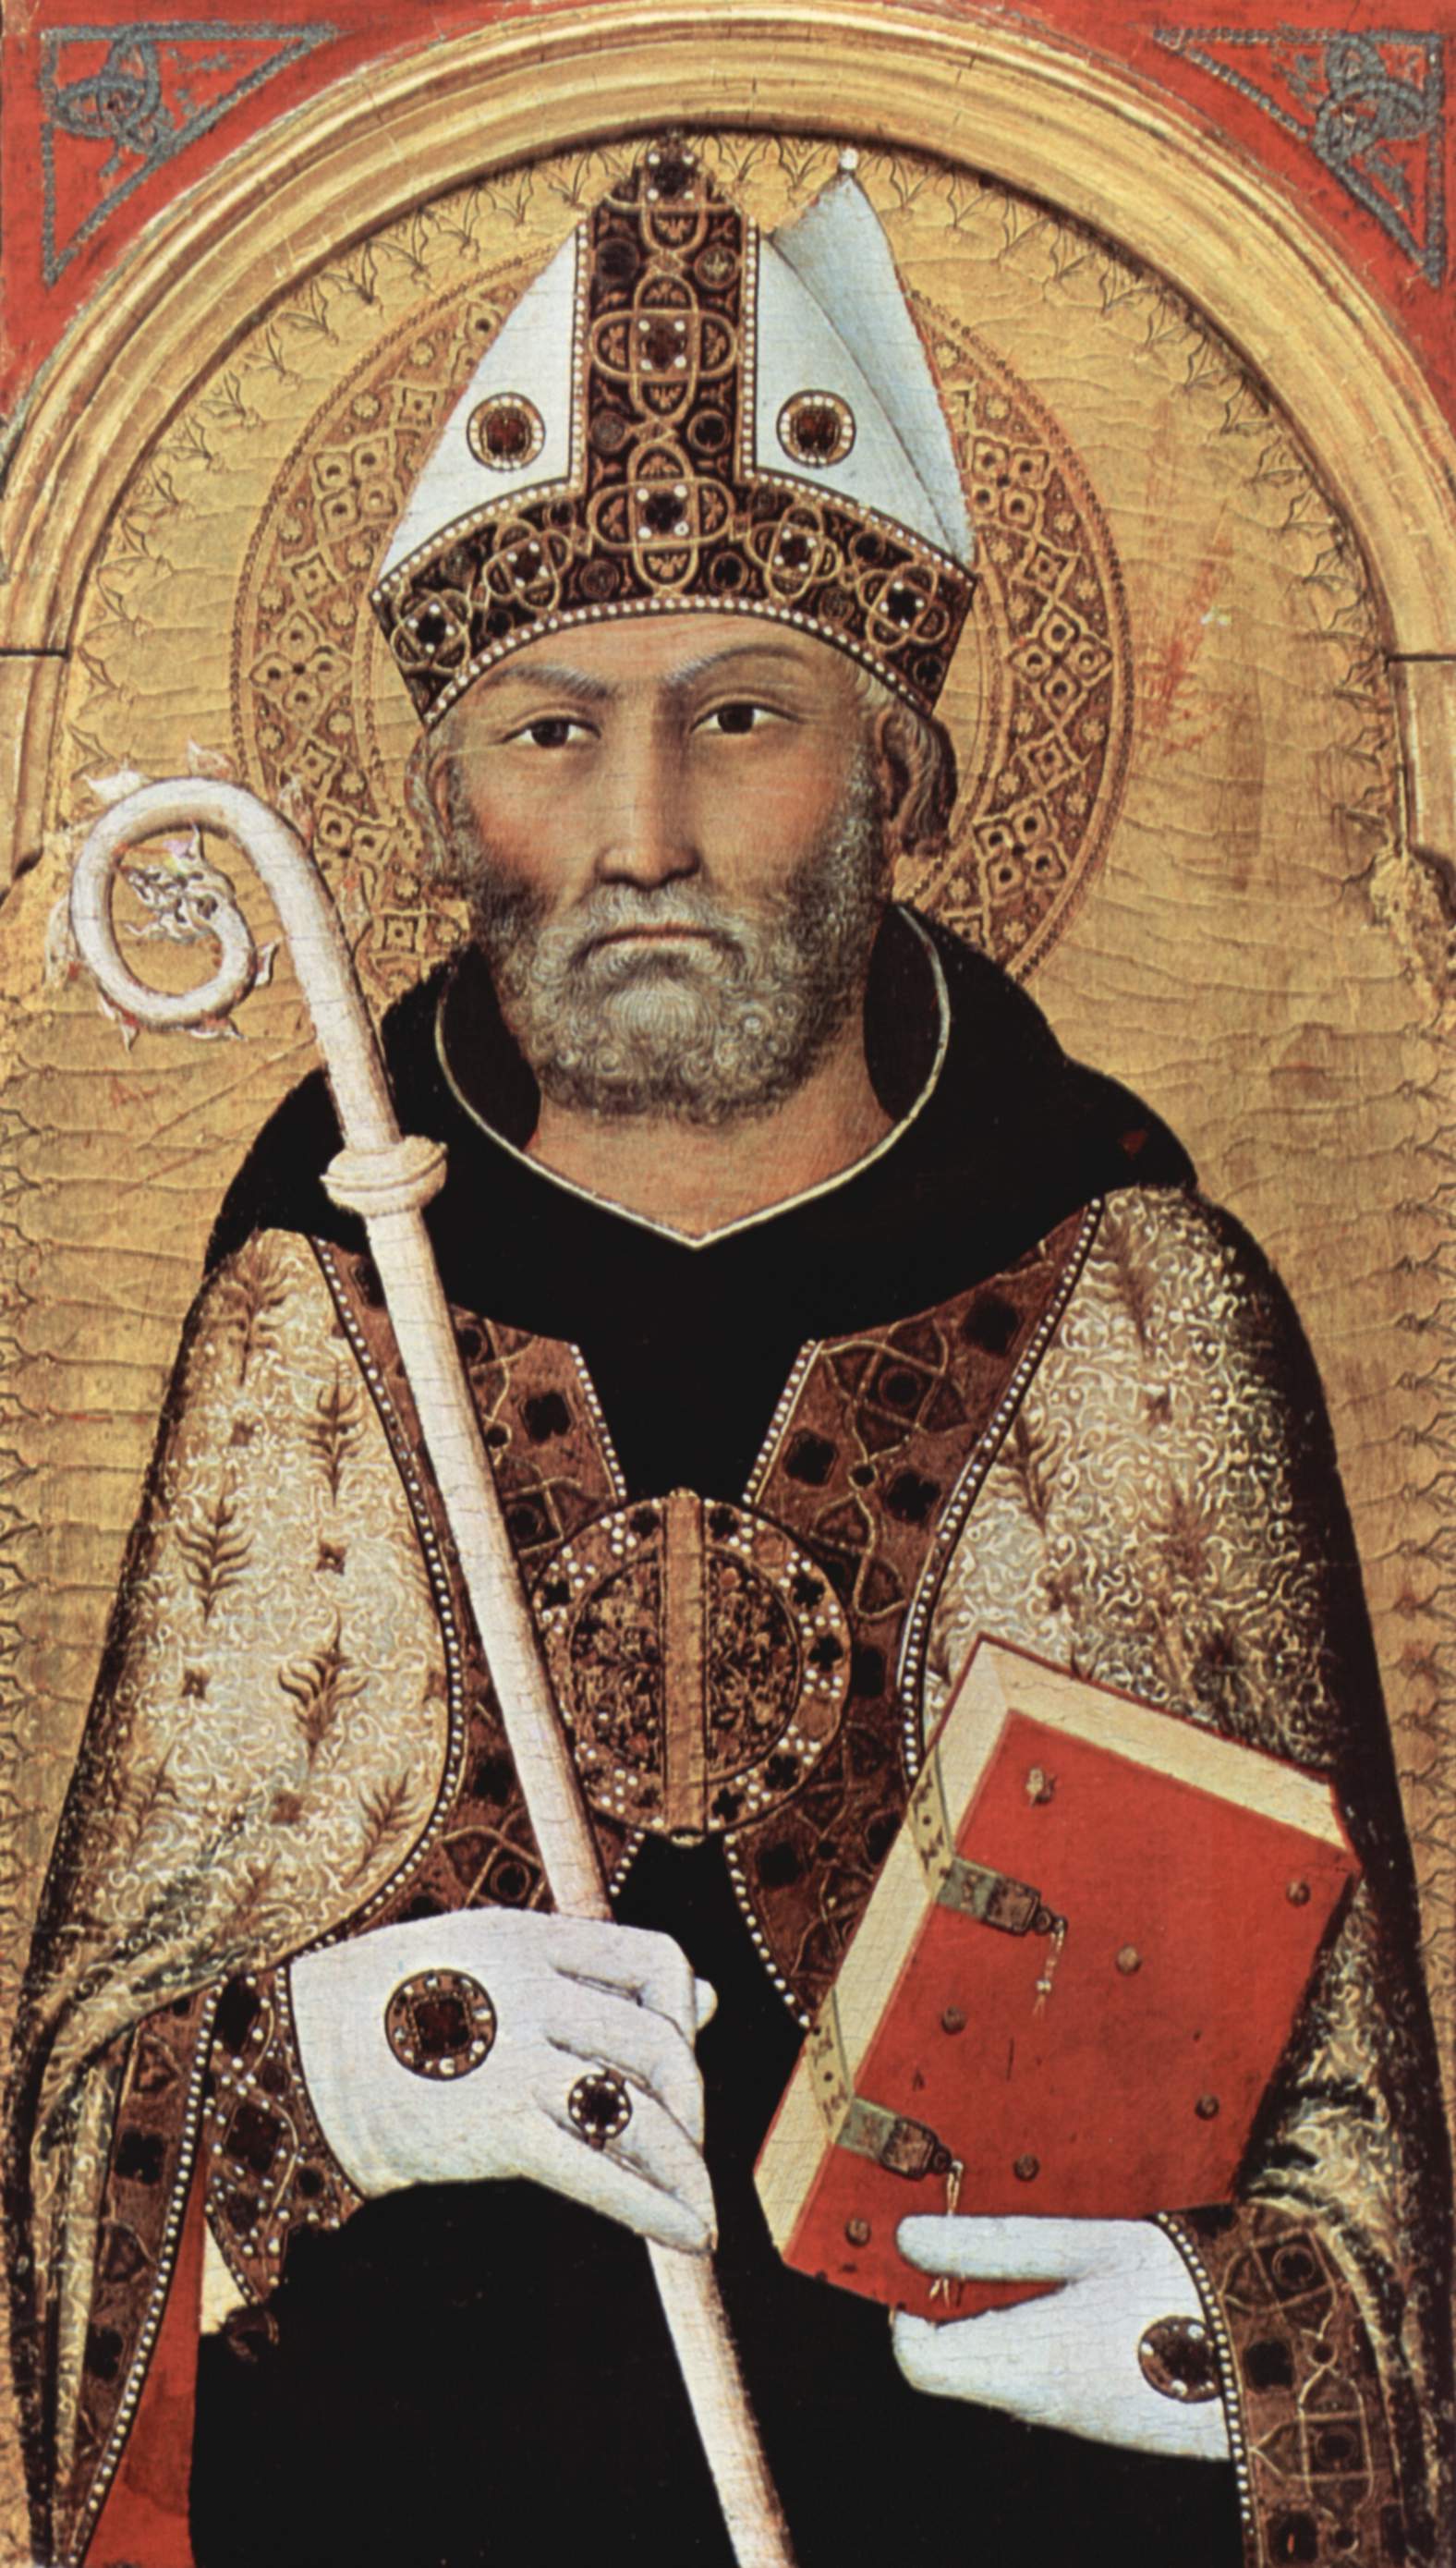 ST. AUGUSTINE OF HIPPO